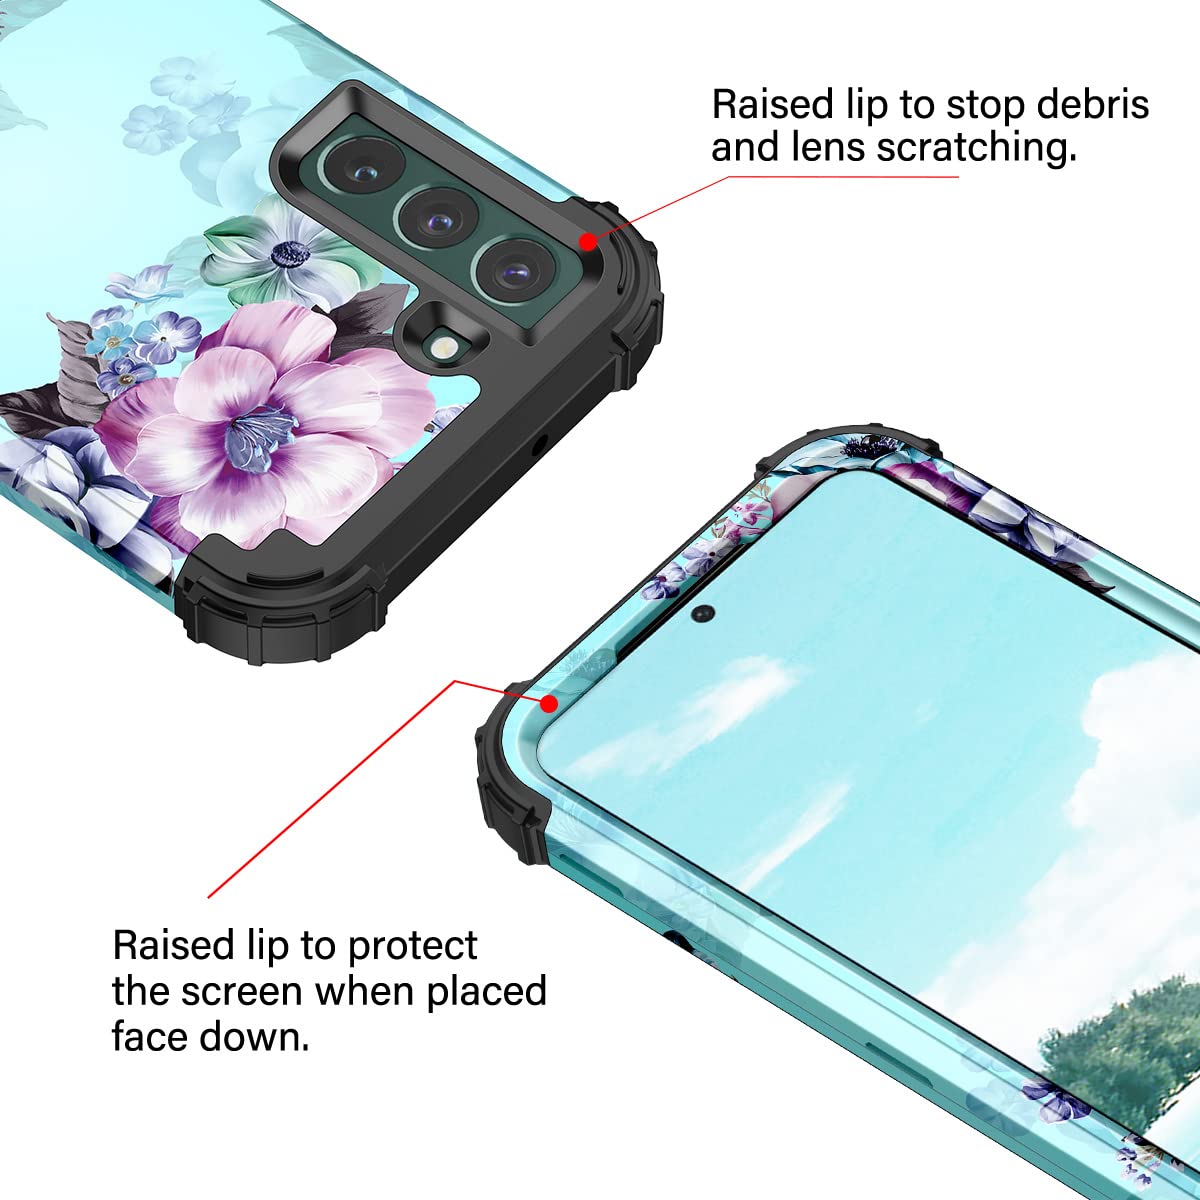 Casetego Compatible with Galaxy S22 5G Case,Floral Three Layer Heavy Duty Sturdy Shockproof Full Body Protective Cover Case for Samsung Galaxy S22 5G,Blue Flower